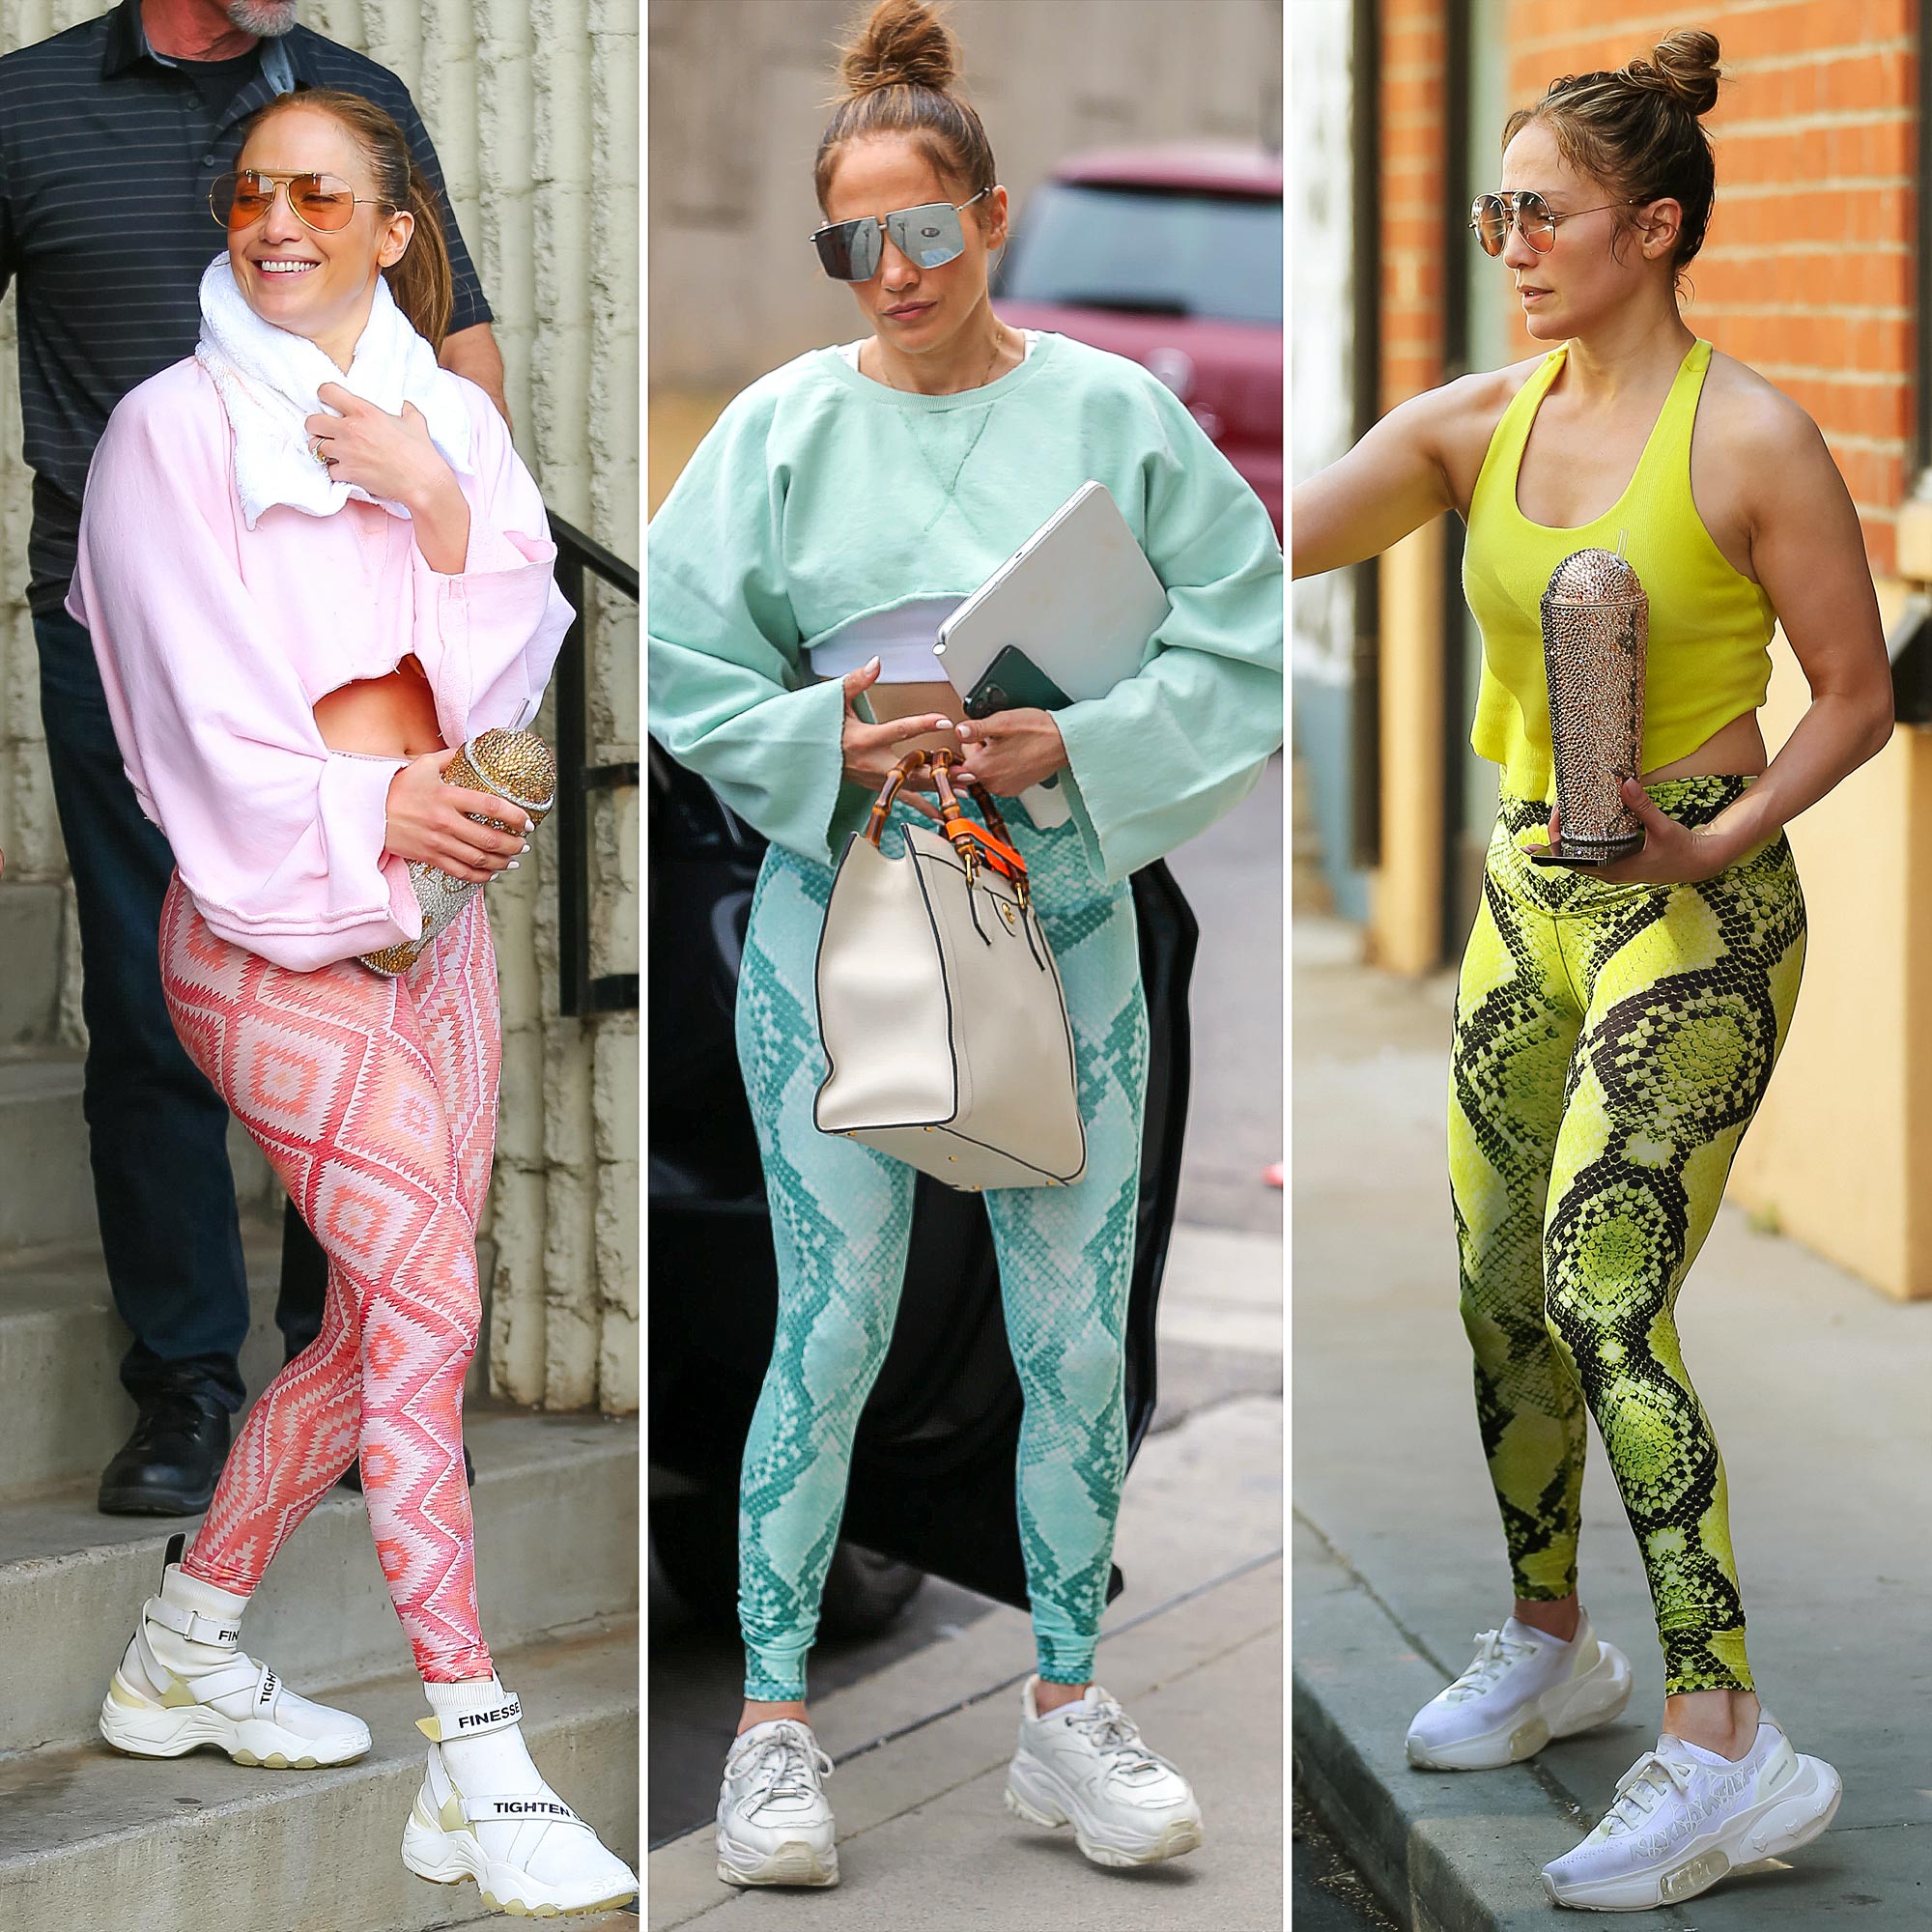 gym selfie  Gymwear outfits, Leggings outfit casual, Stylish gym outfits